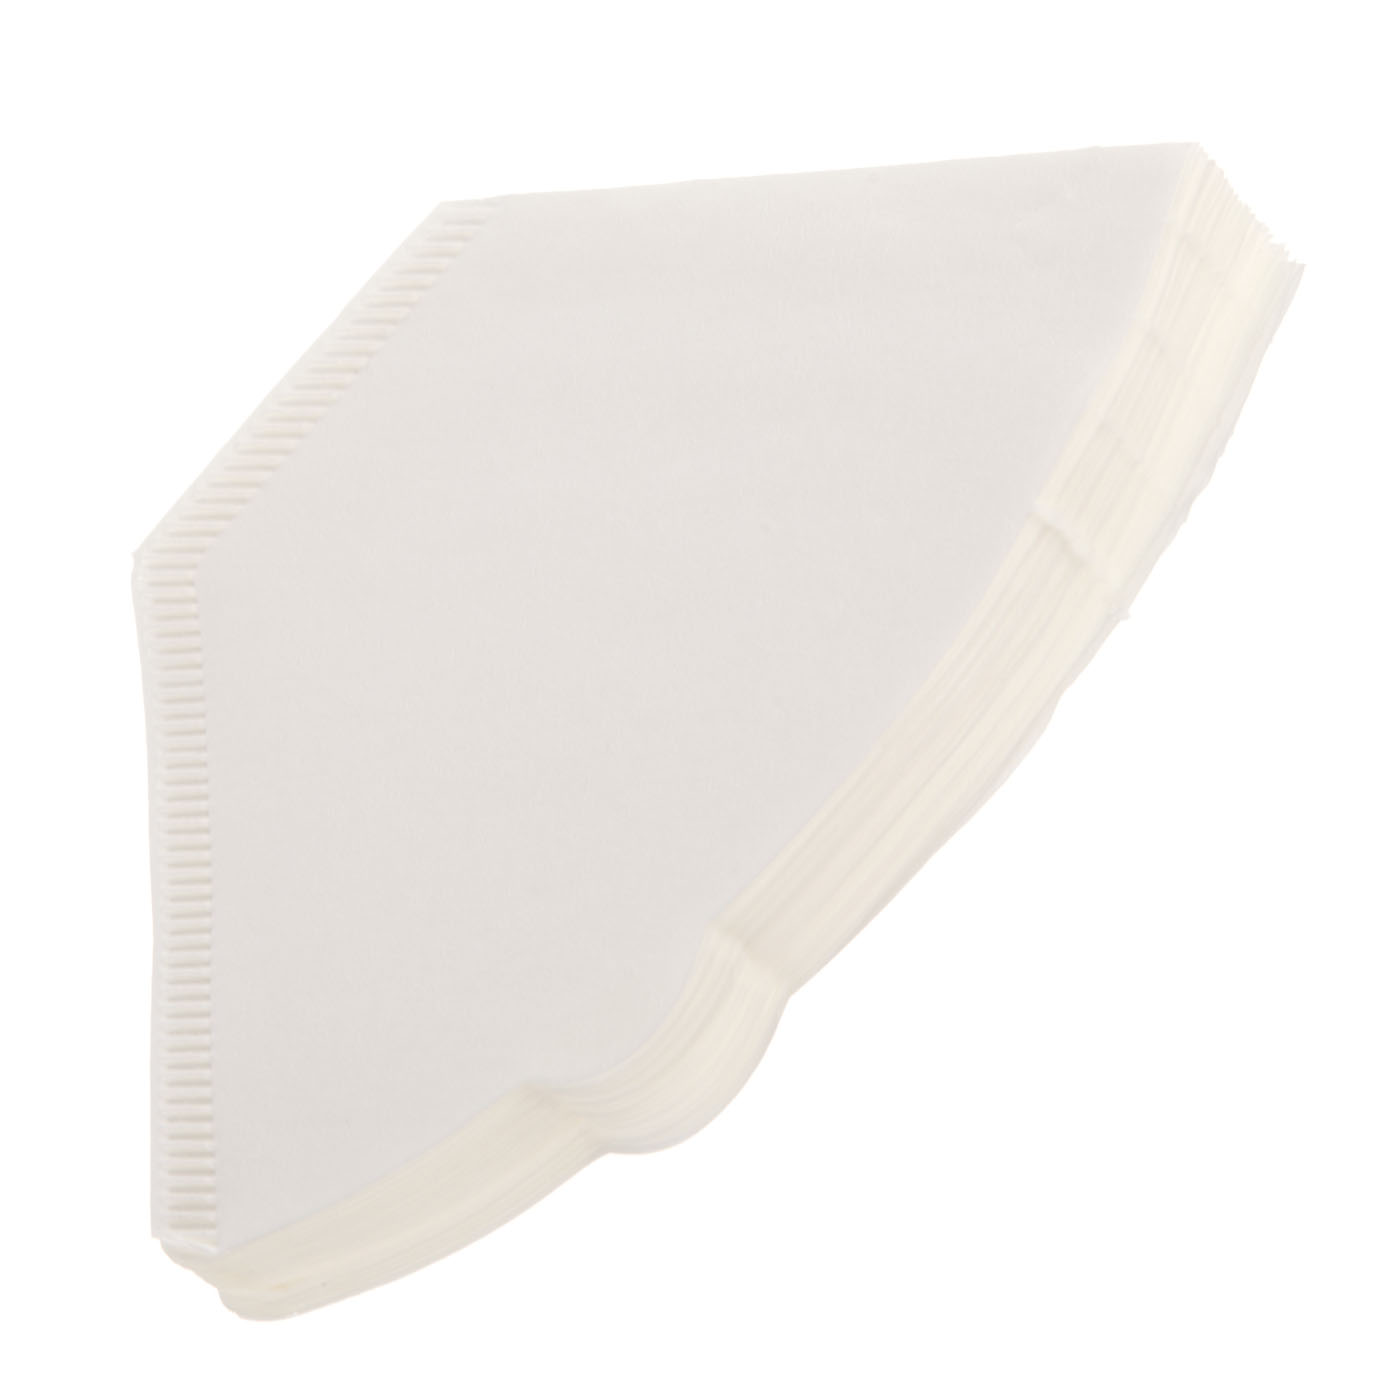 Filtropa Coffee Filter Papers Size 1 (01)